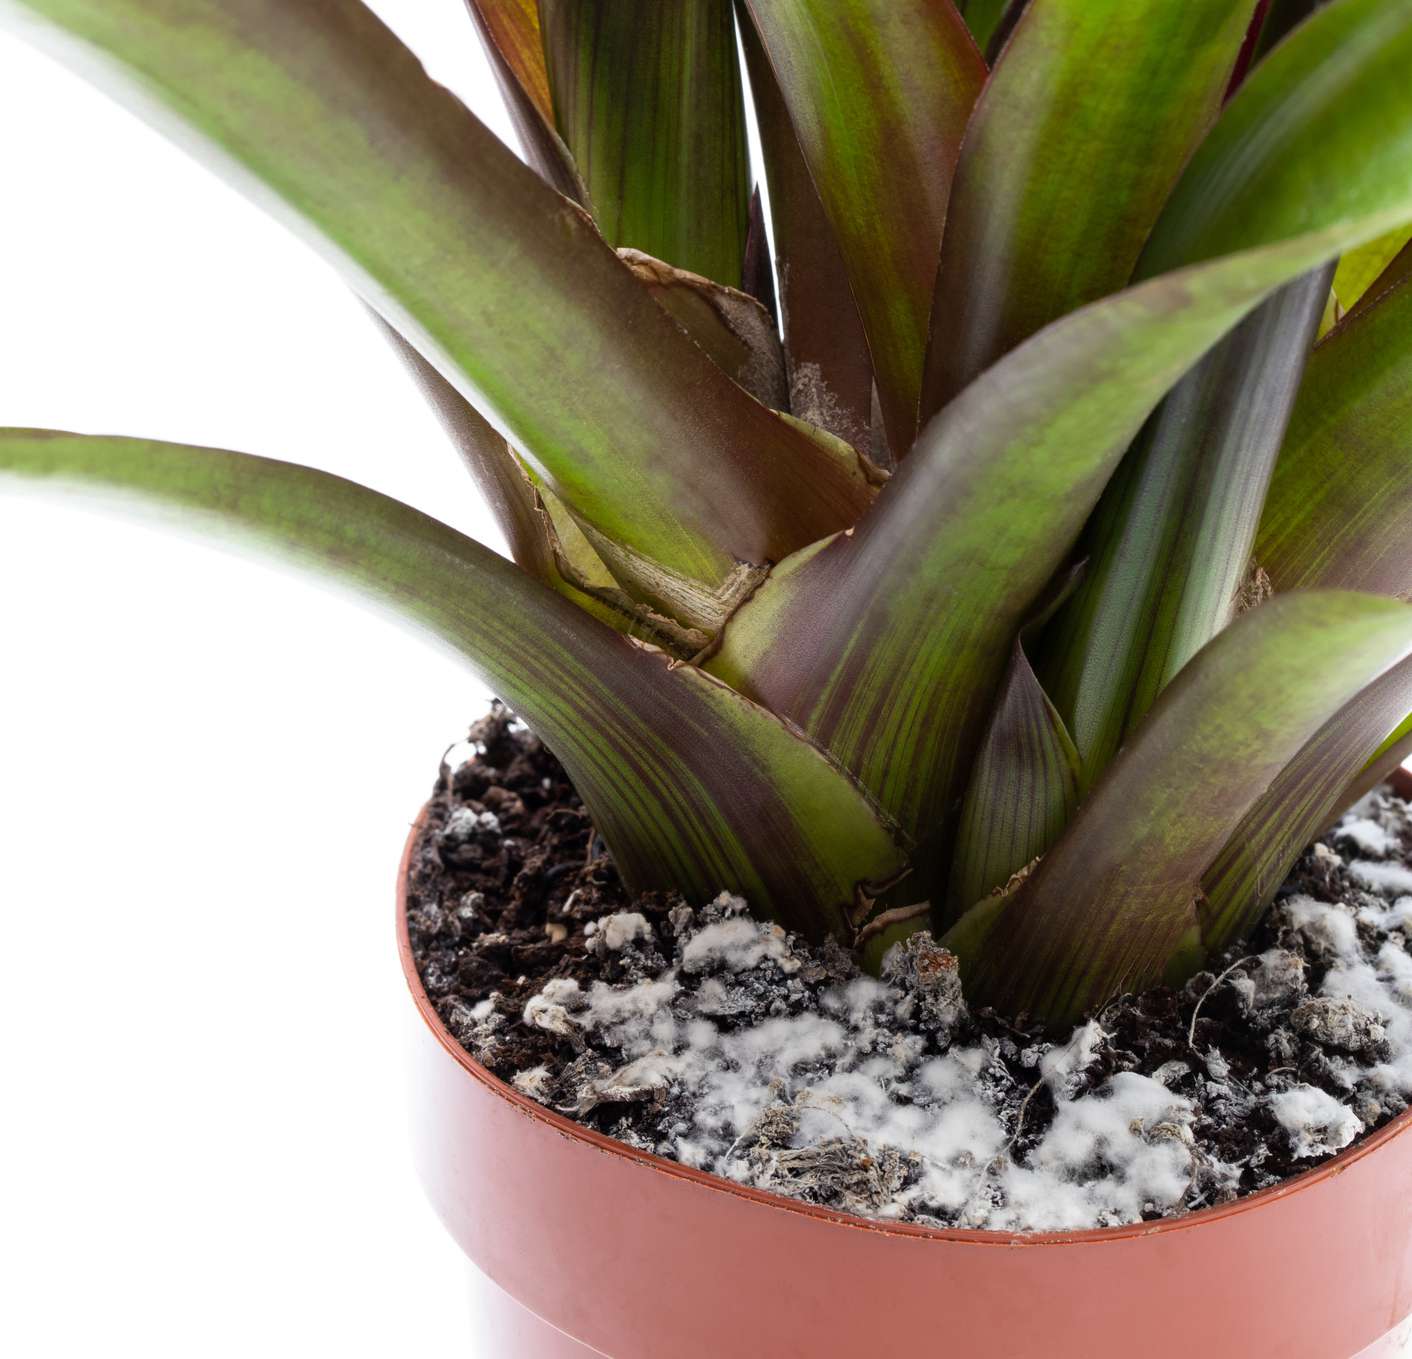 A dracaena houseplant with white fluffy mold on the soil.